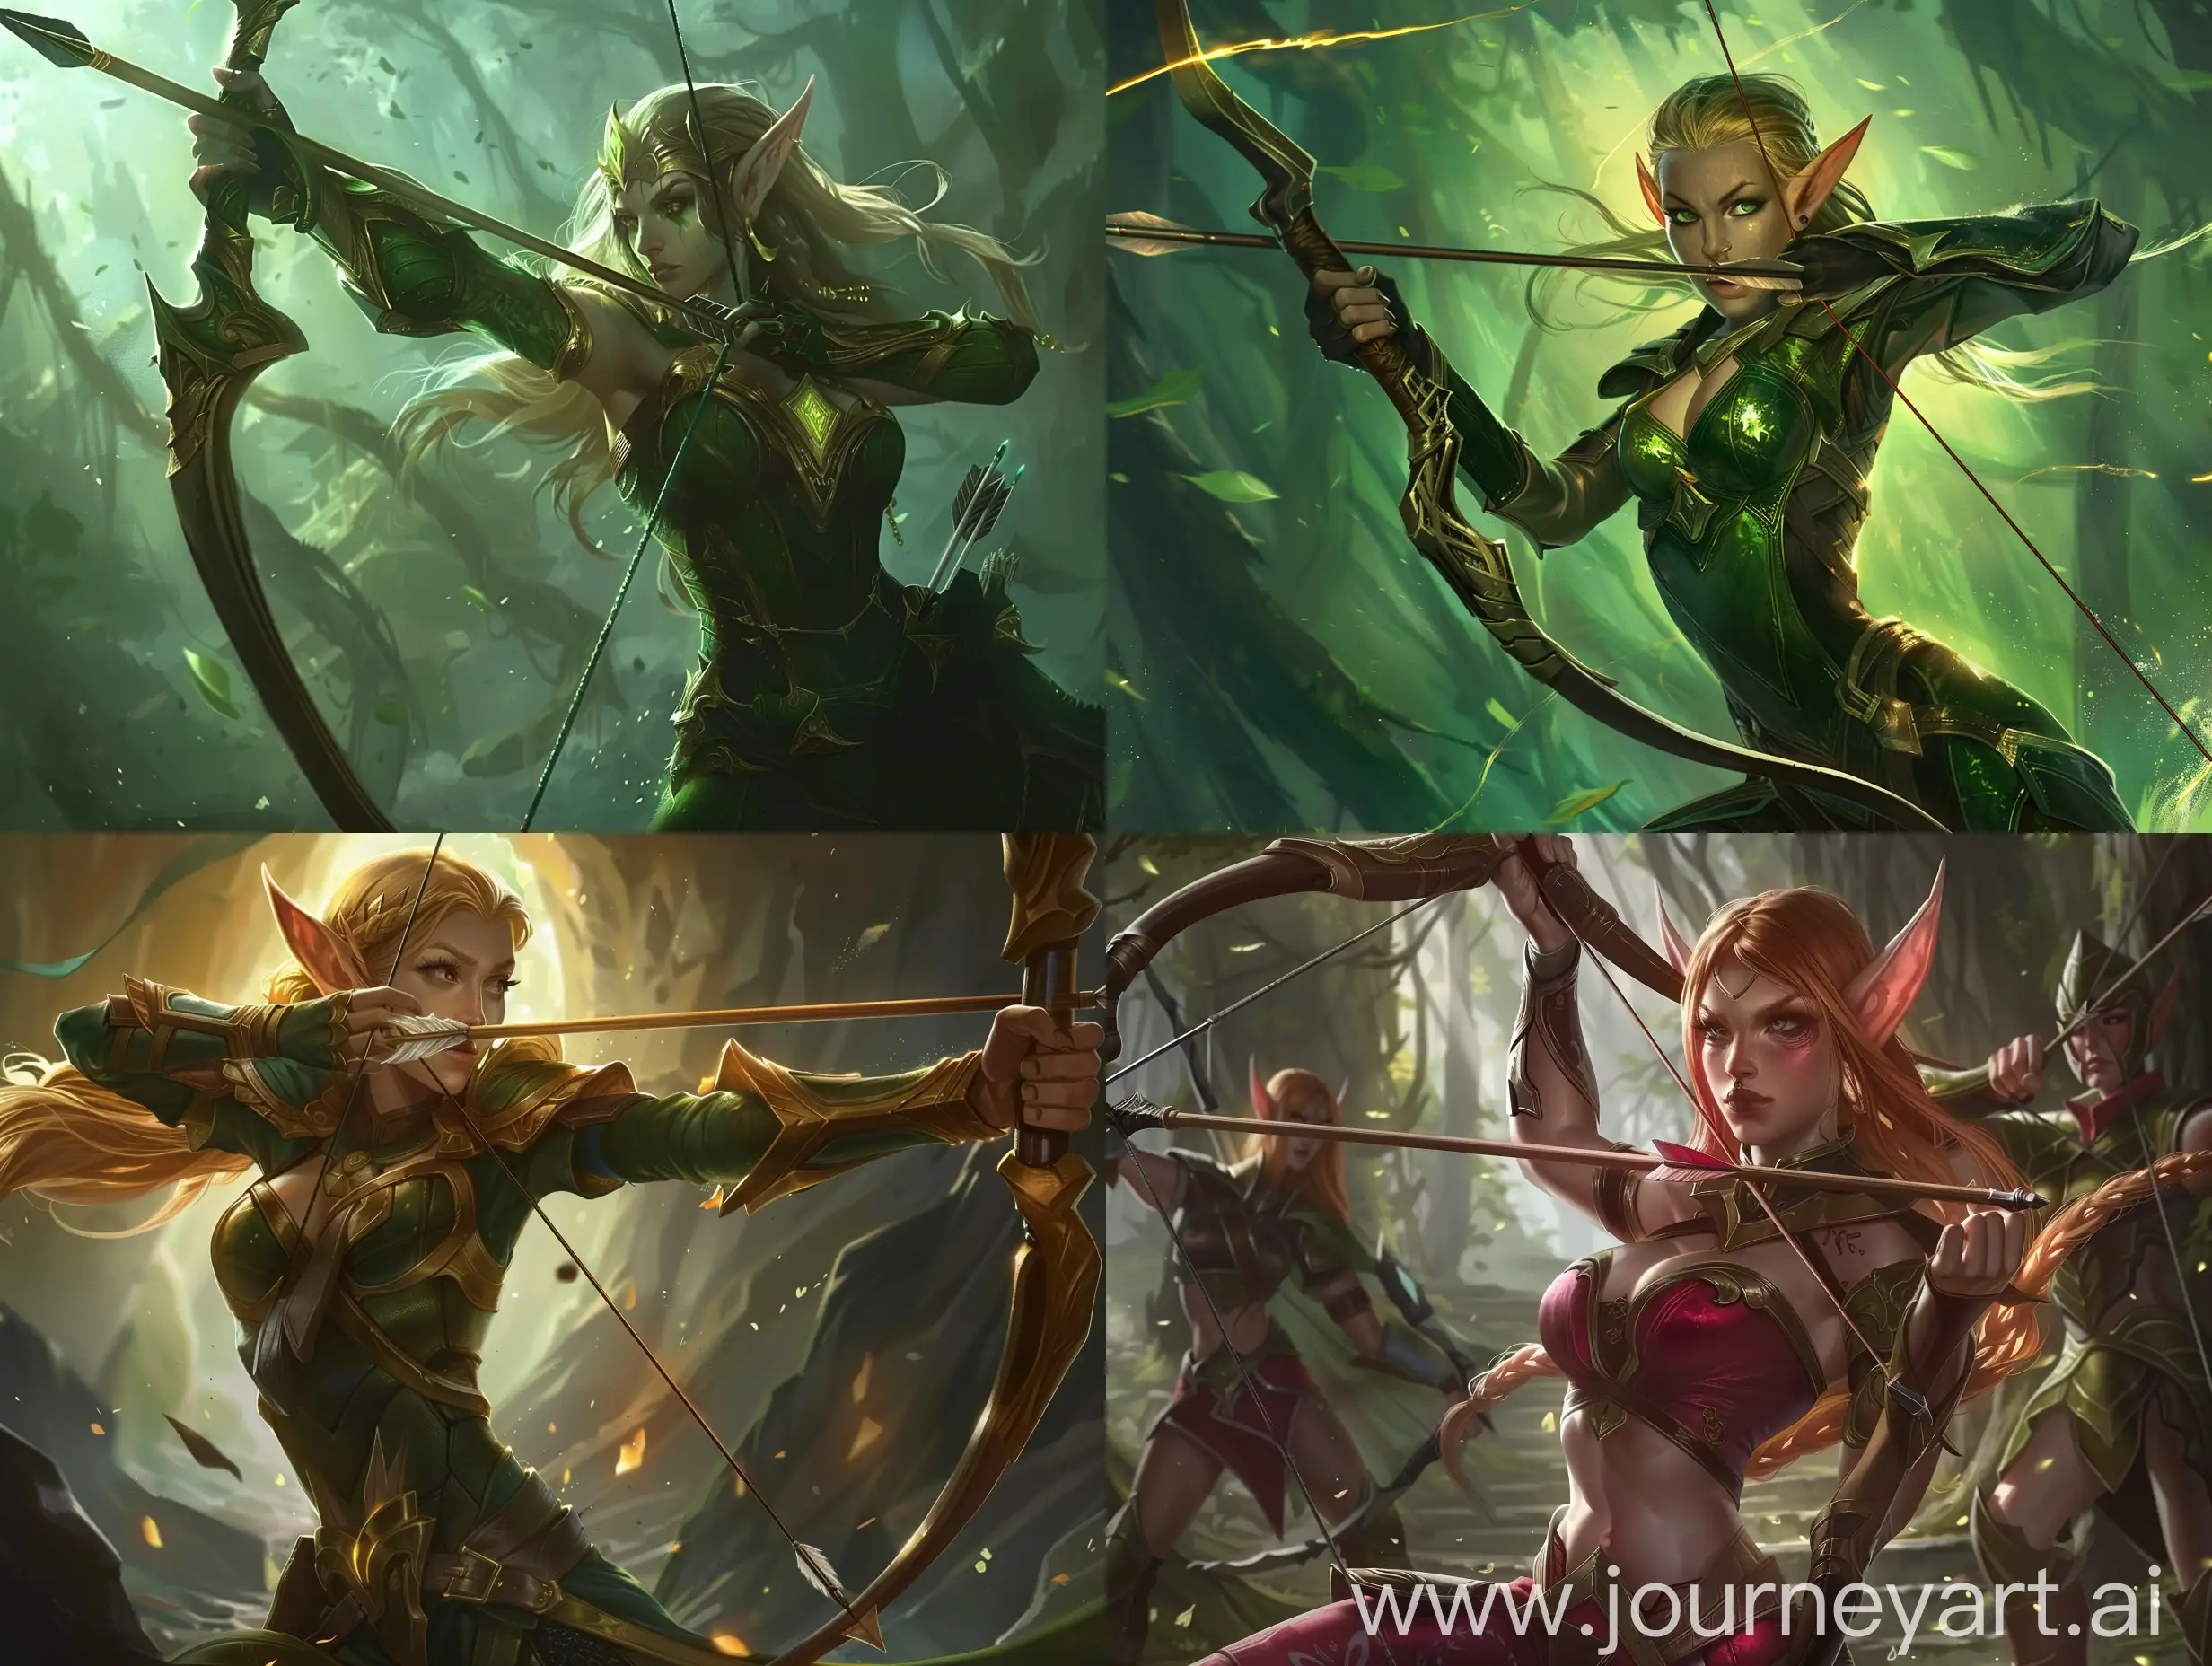 Elven-Archer-in-Action-Dynamic-Pose-Inspired-by-League-of-Legends-Art